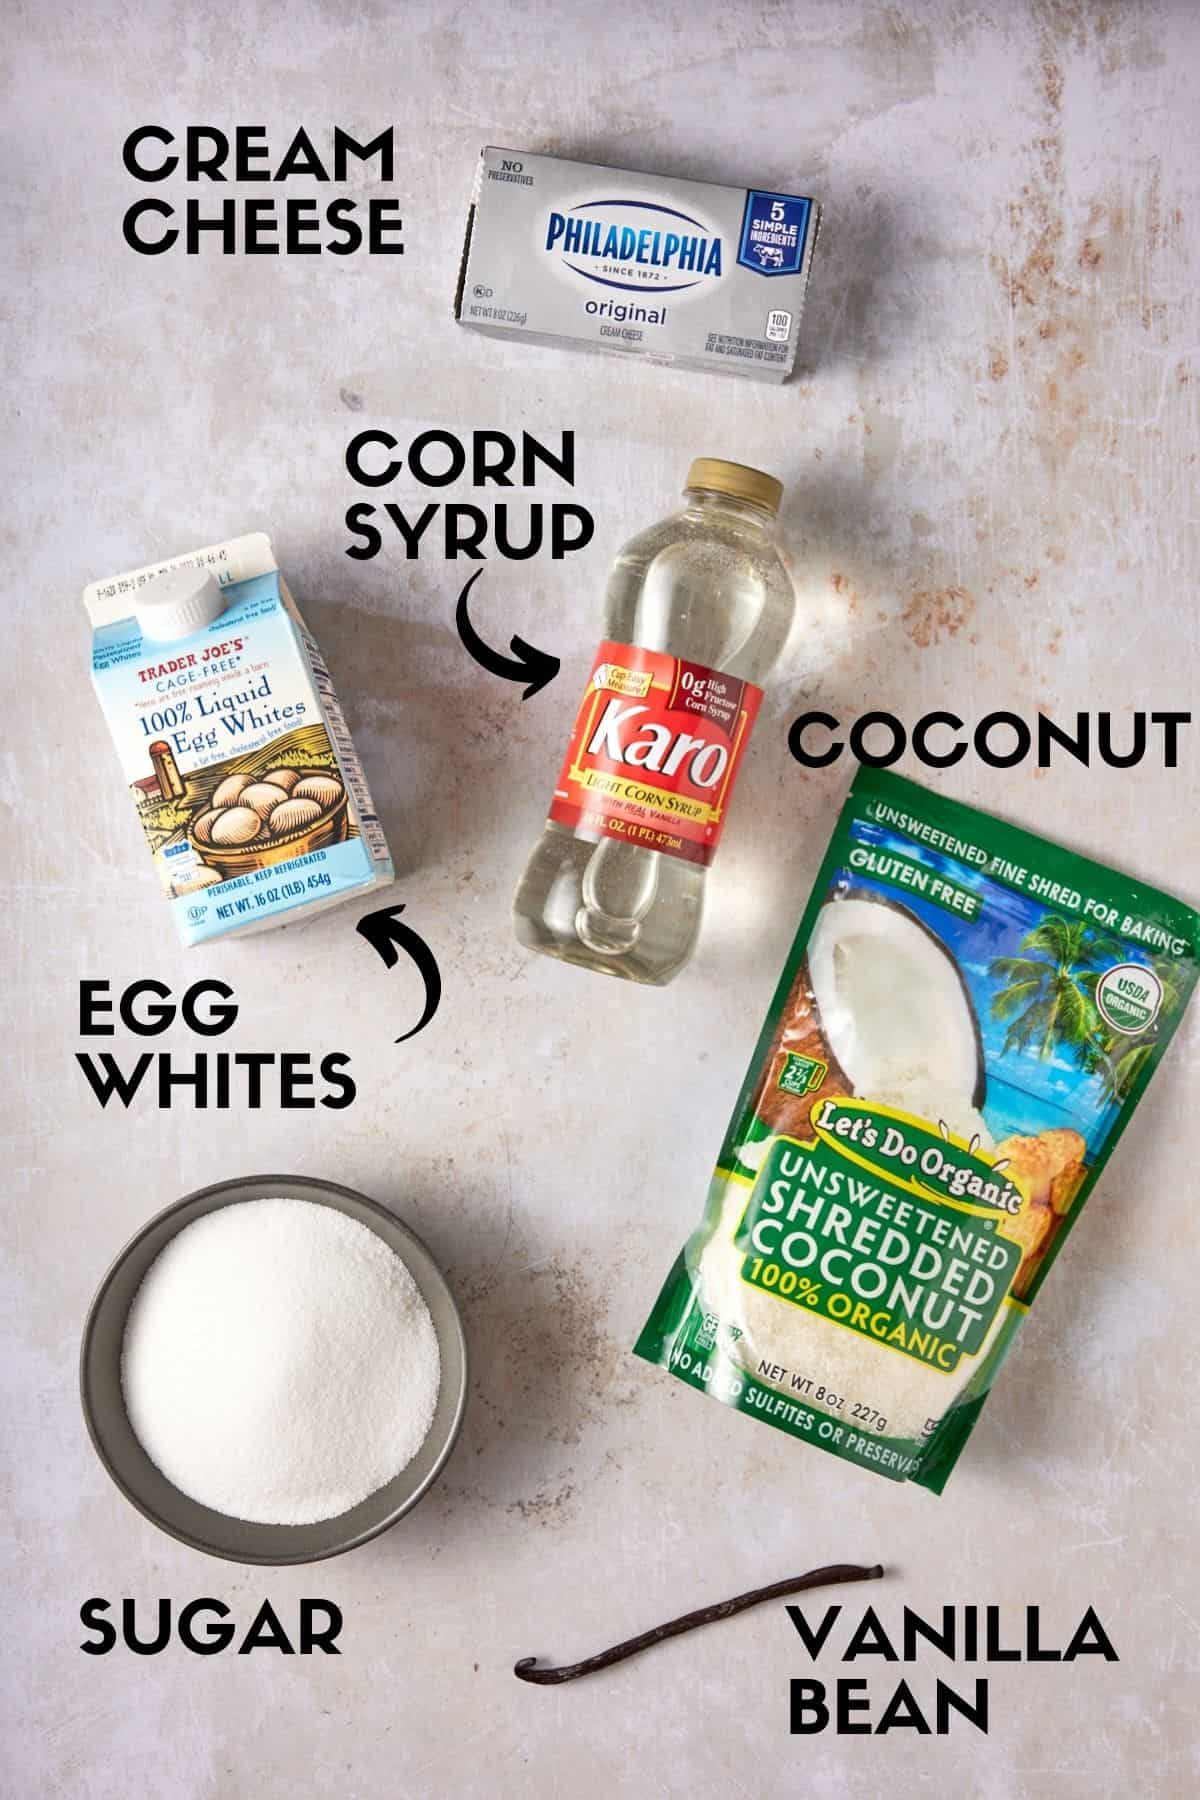 Coconut macaroon ingredients including coconut, sugar, egg whites and vanilla. 